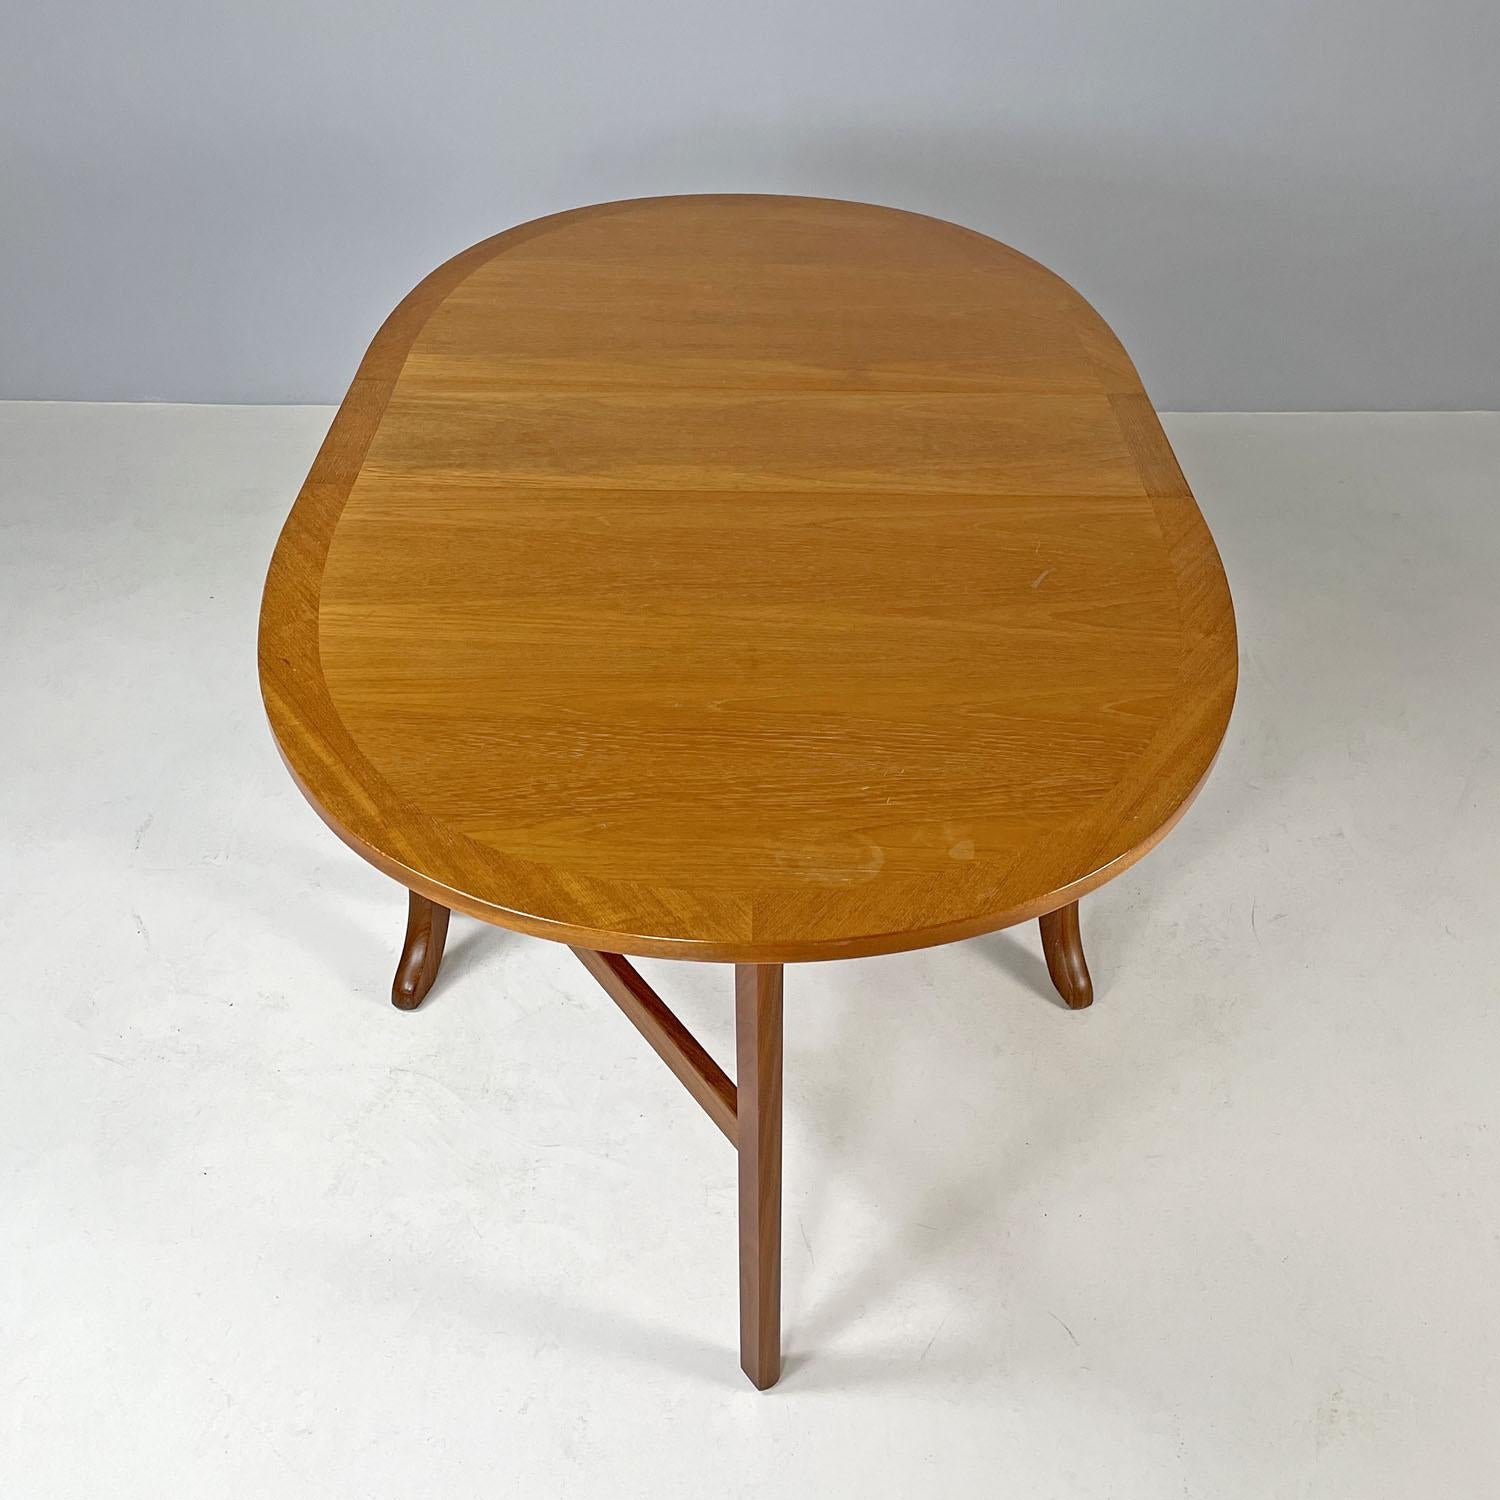 Mid-20th Century English mid-century modern wooden dining table with flap doors, 1960s For Sale